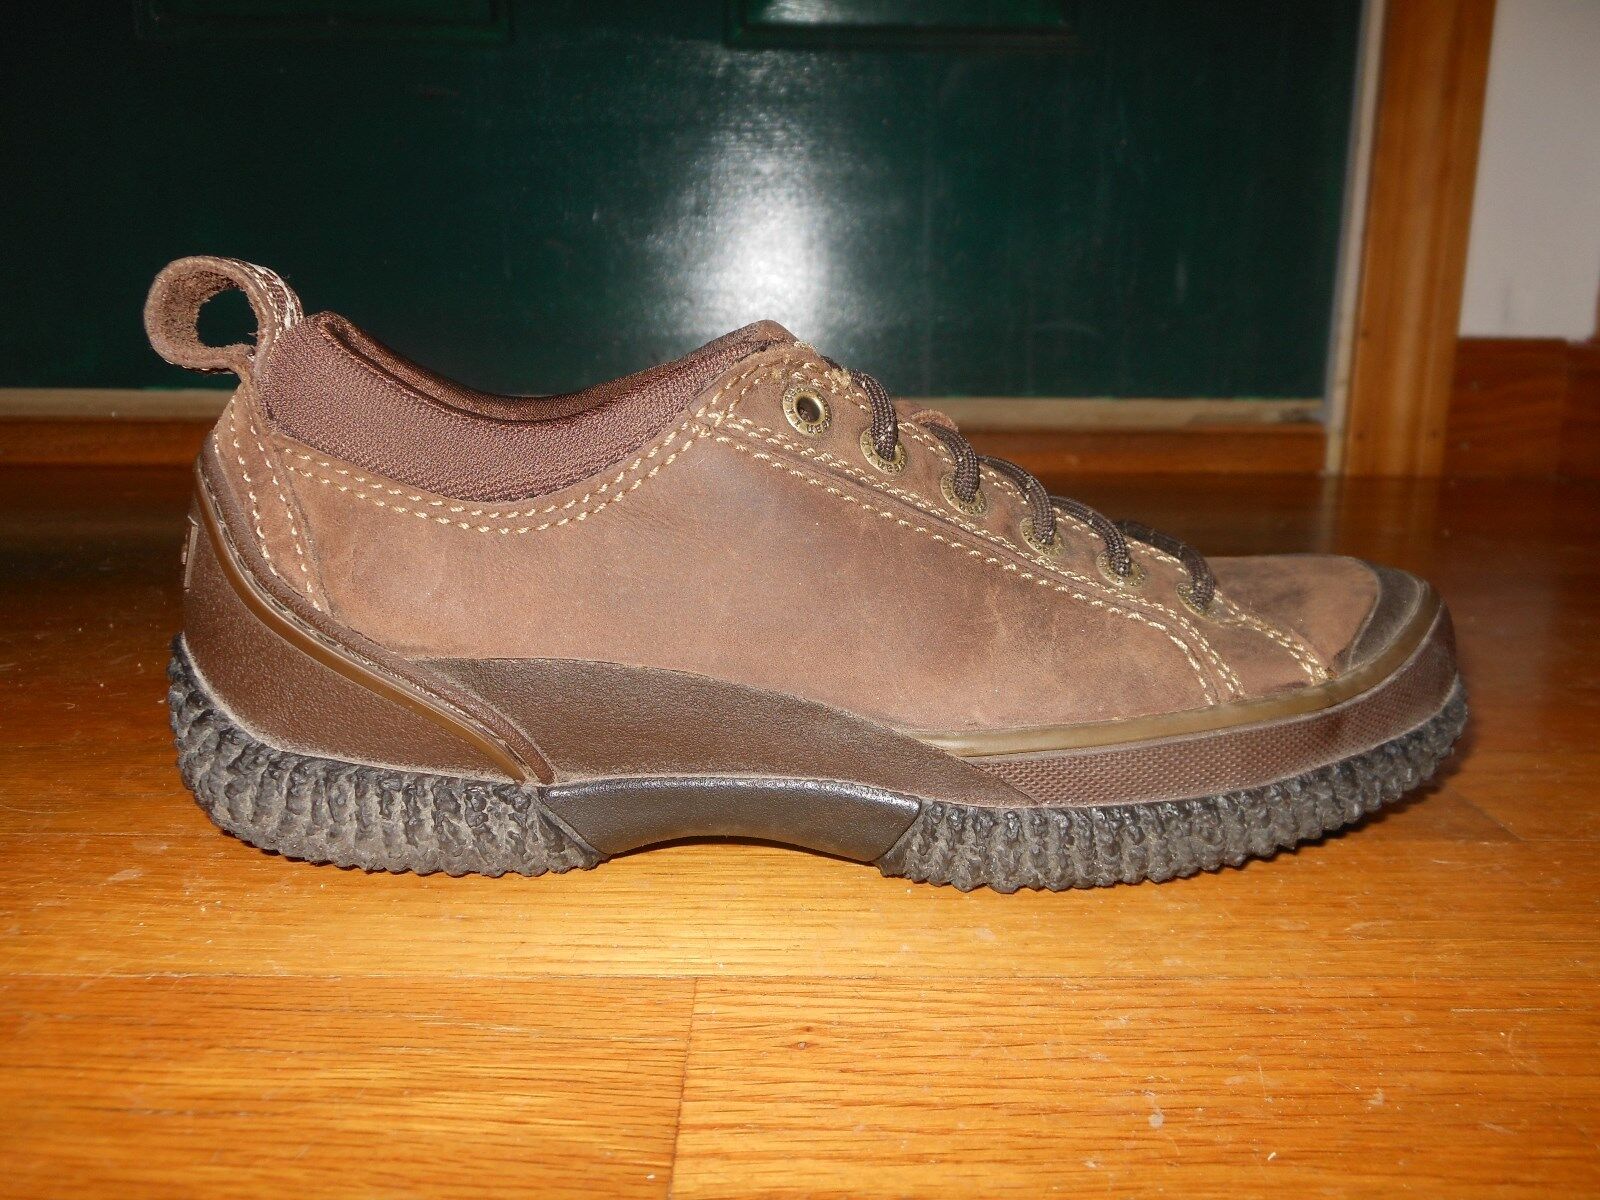 LL Bean 05455 Women's hiking shoes - Sz 6.5M - Excellent condition for ...